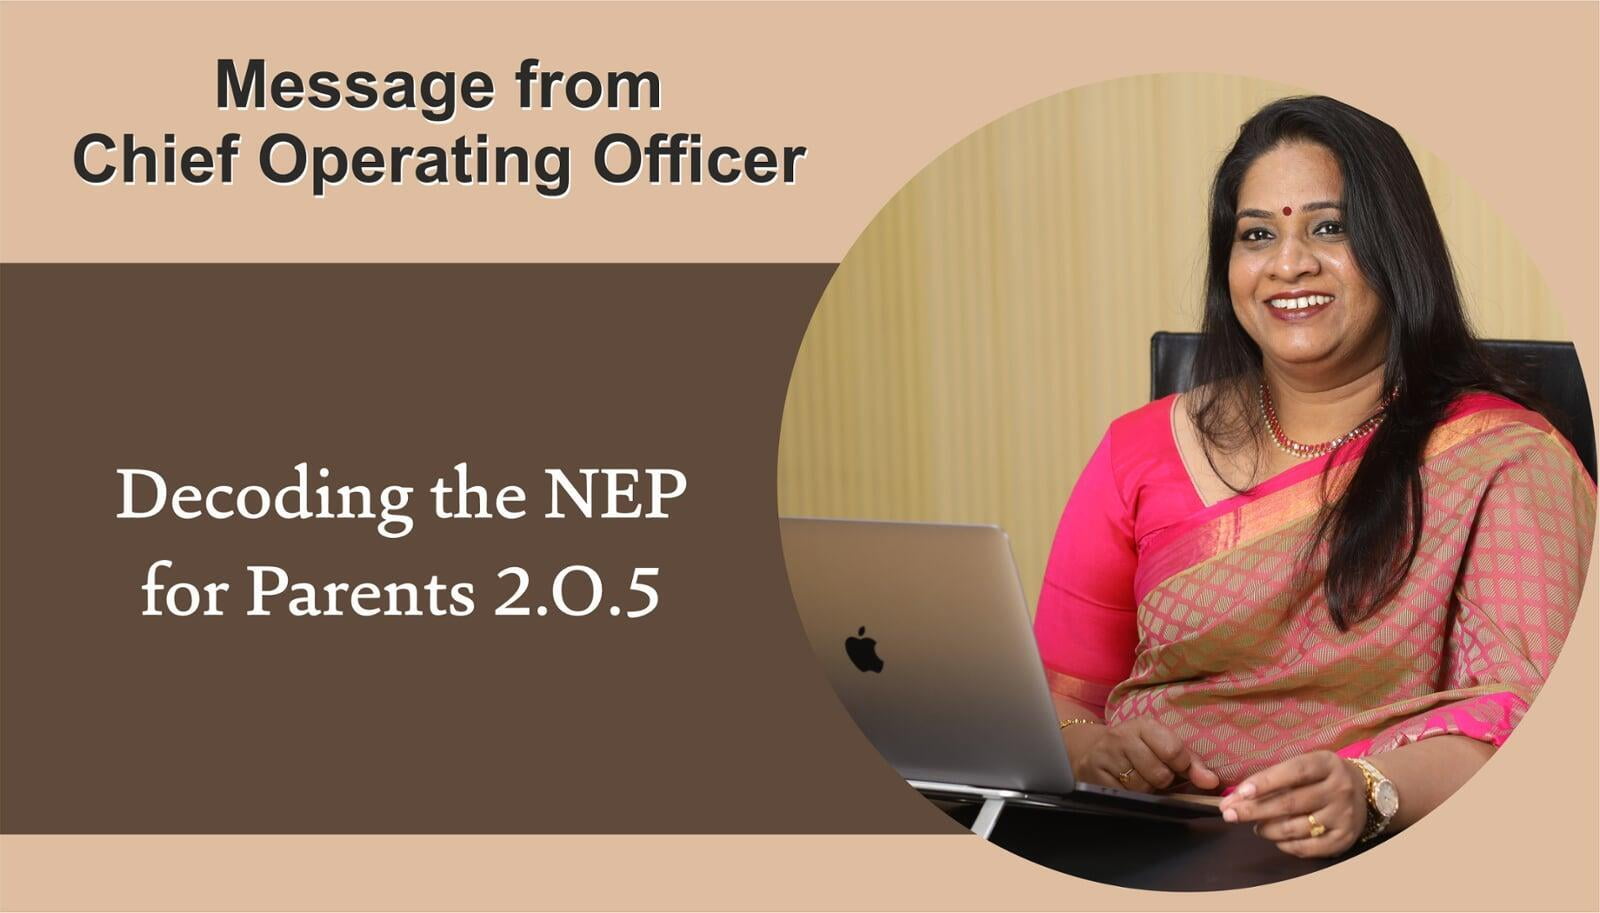 Decoding the NEP for Parents 2.0.5